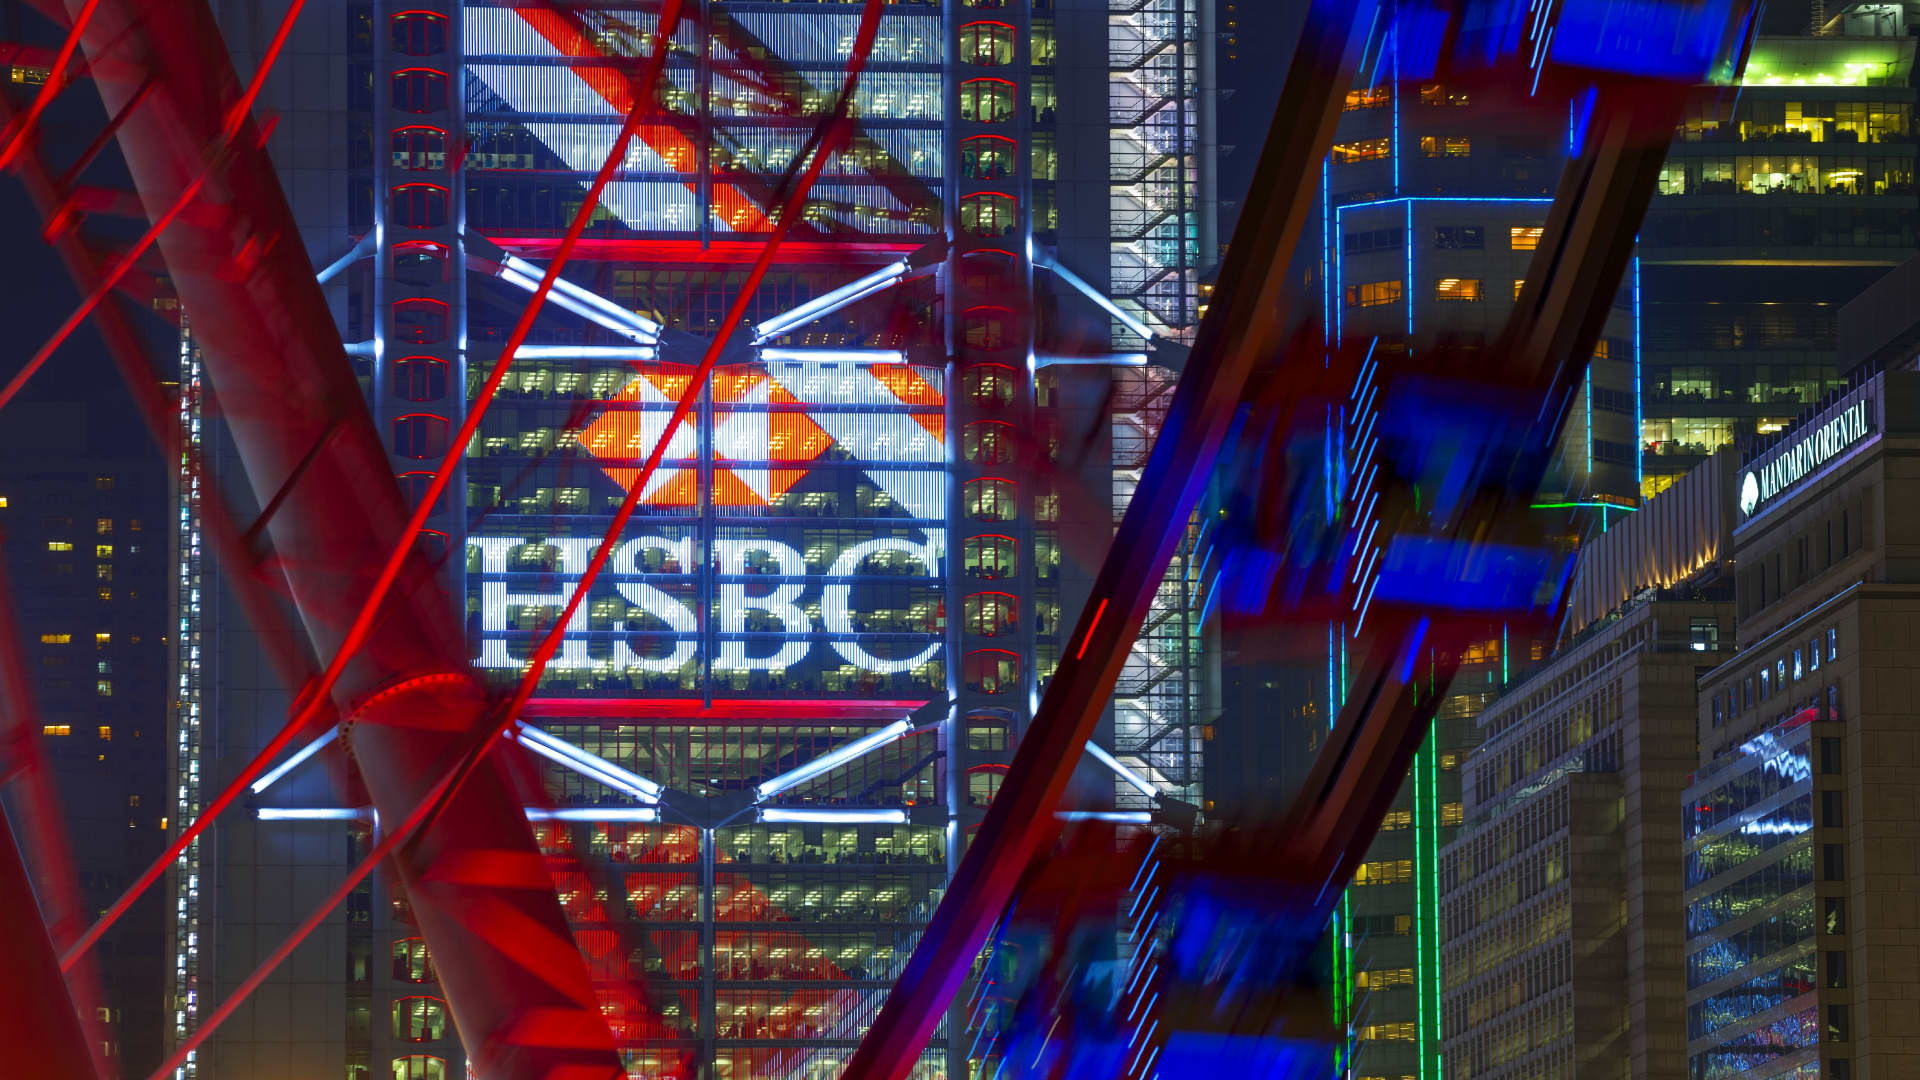 HSBC is ‘very positive’ about the future of China’s economy, CFO says